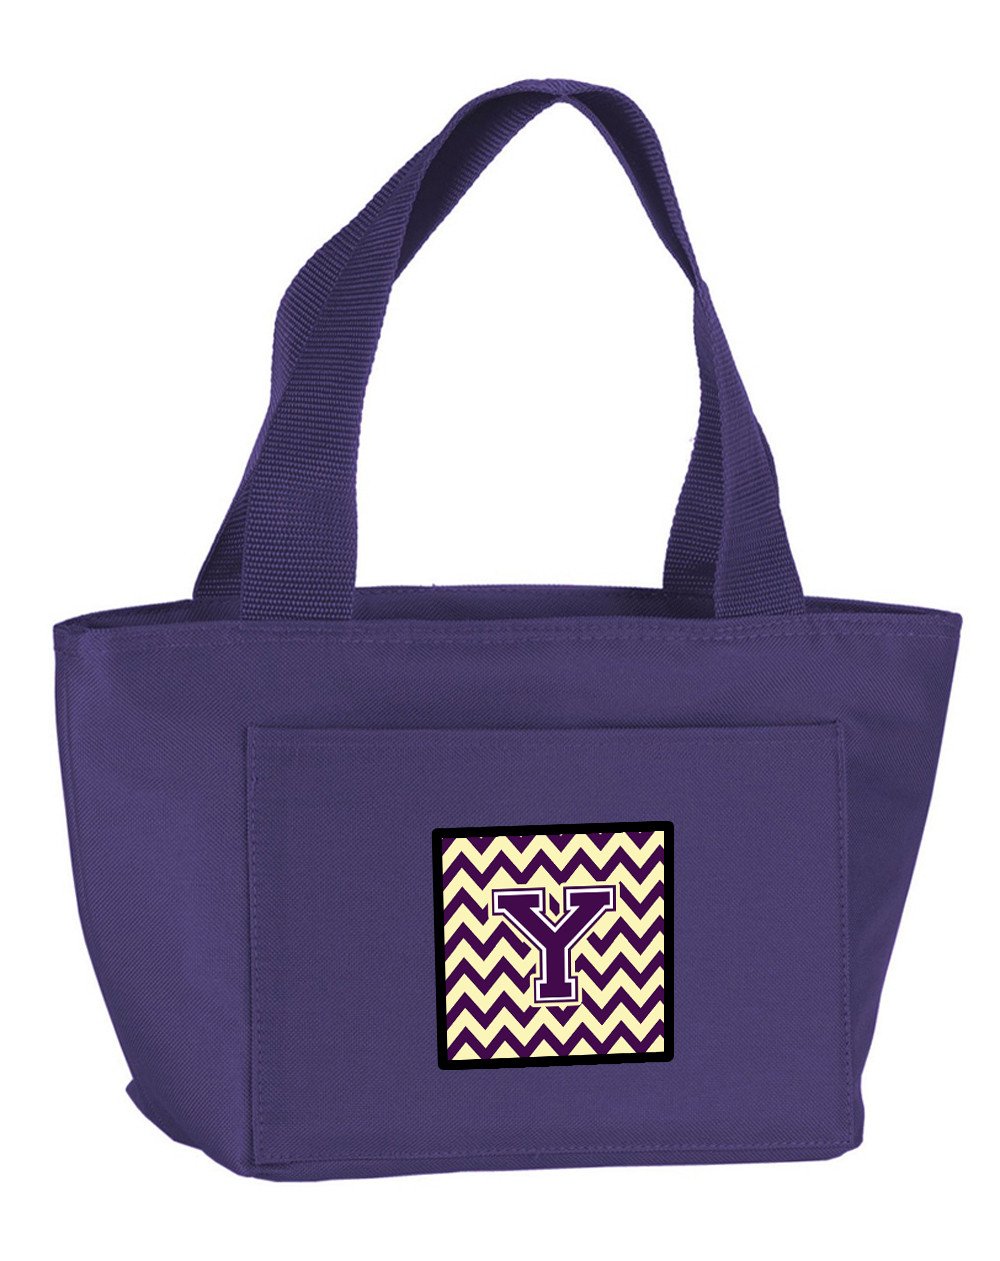 Letter Y Chevron Purple and Gold Lunch Bag CJ1058-YPR-8808 by Caroline's Treasures